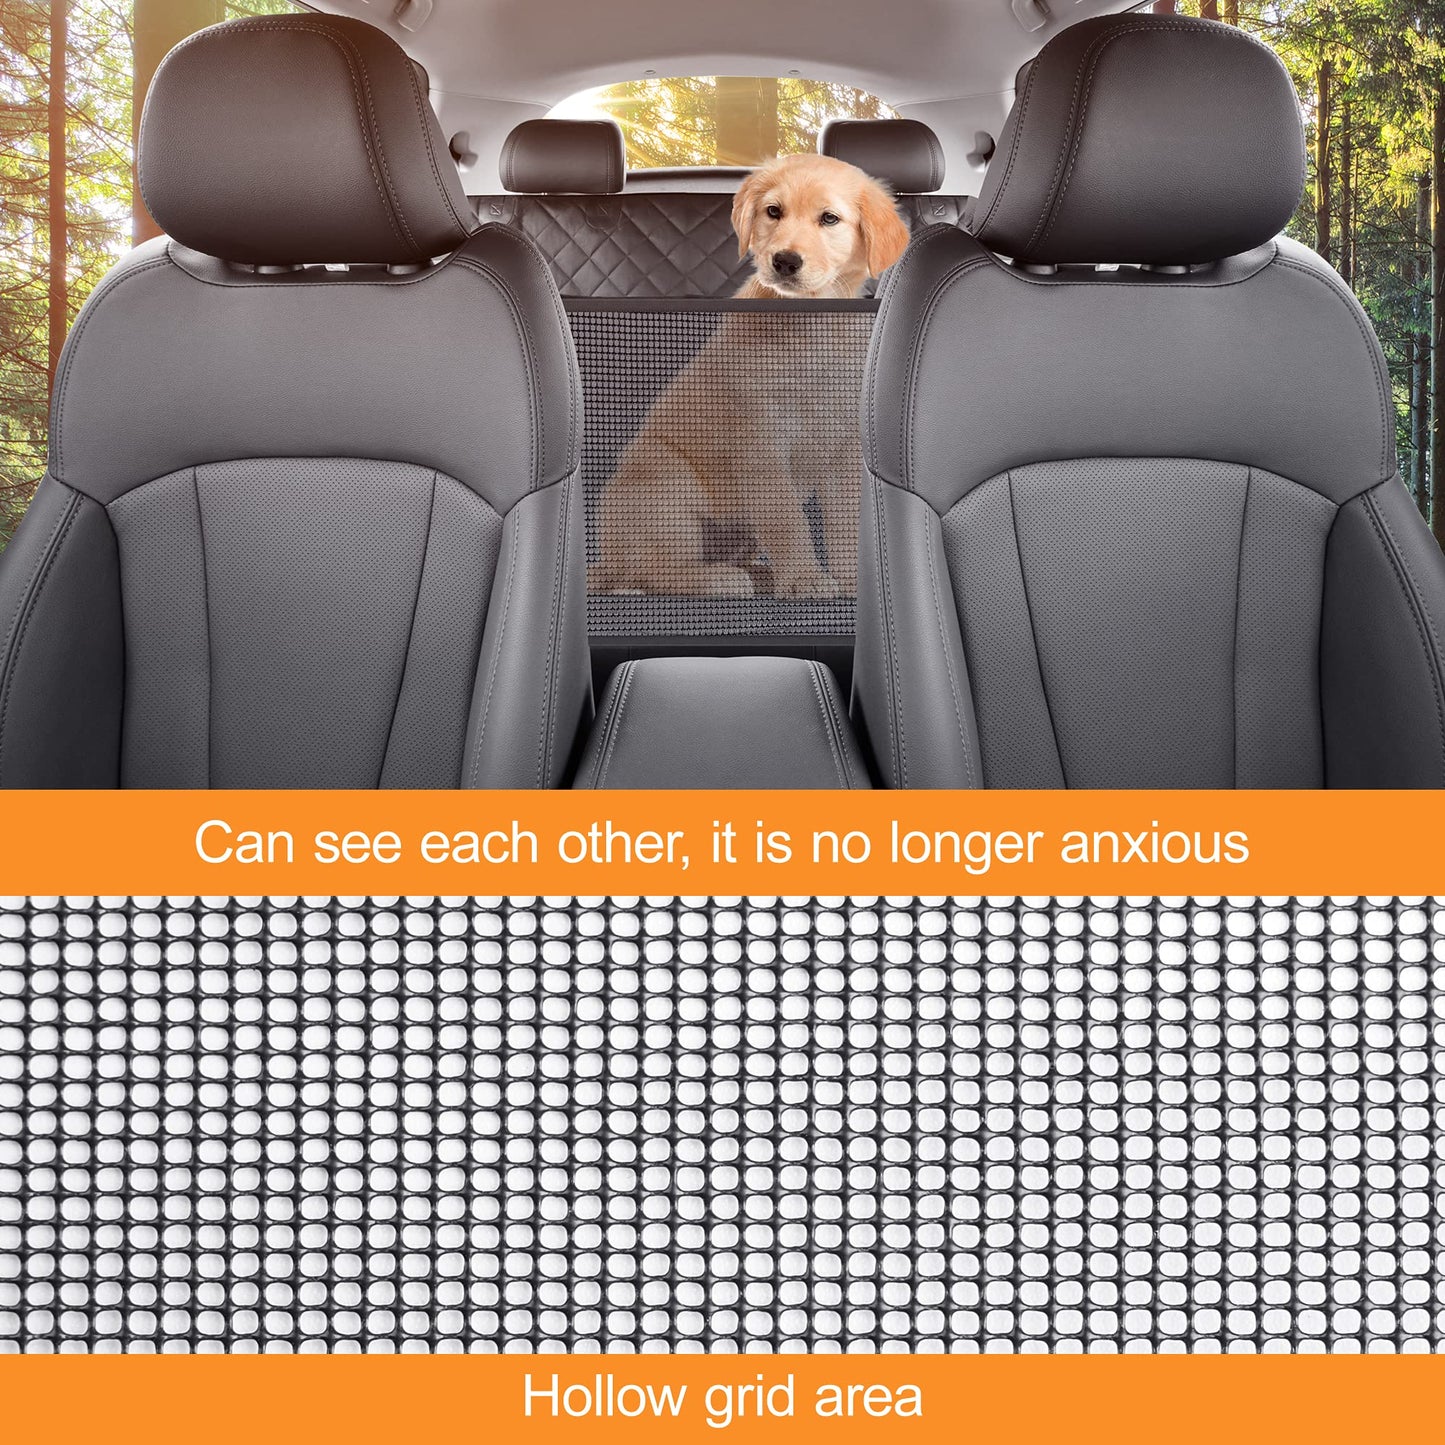 GXT Dog Back Seat Cover Protector for Cars SUV and Trucks with Mesh Window, Scratchproof Nonslip and Waterproof Material